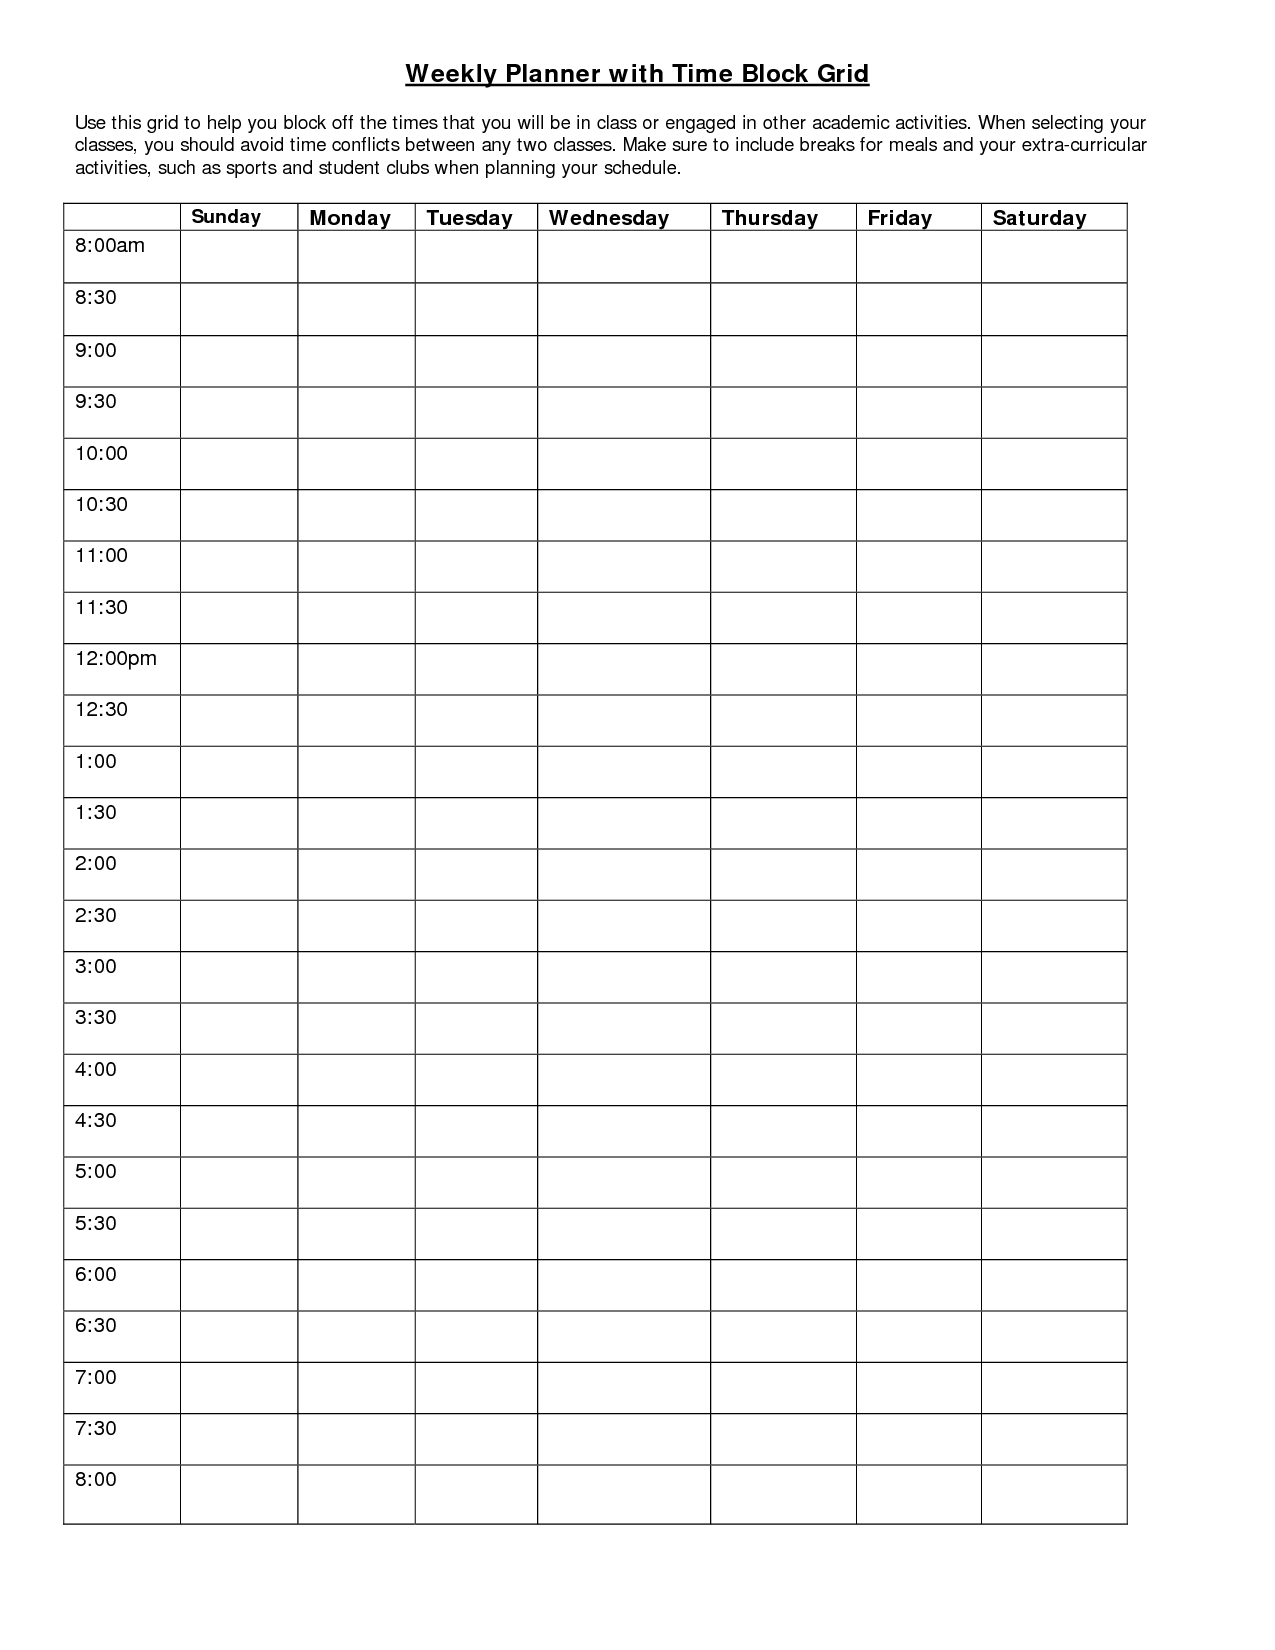 Weekly Planner With Time Block Grid | Weekly Planner  30 Day Planner Template